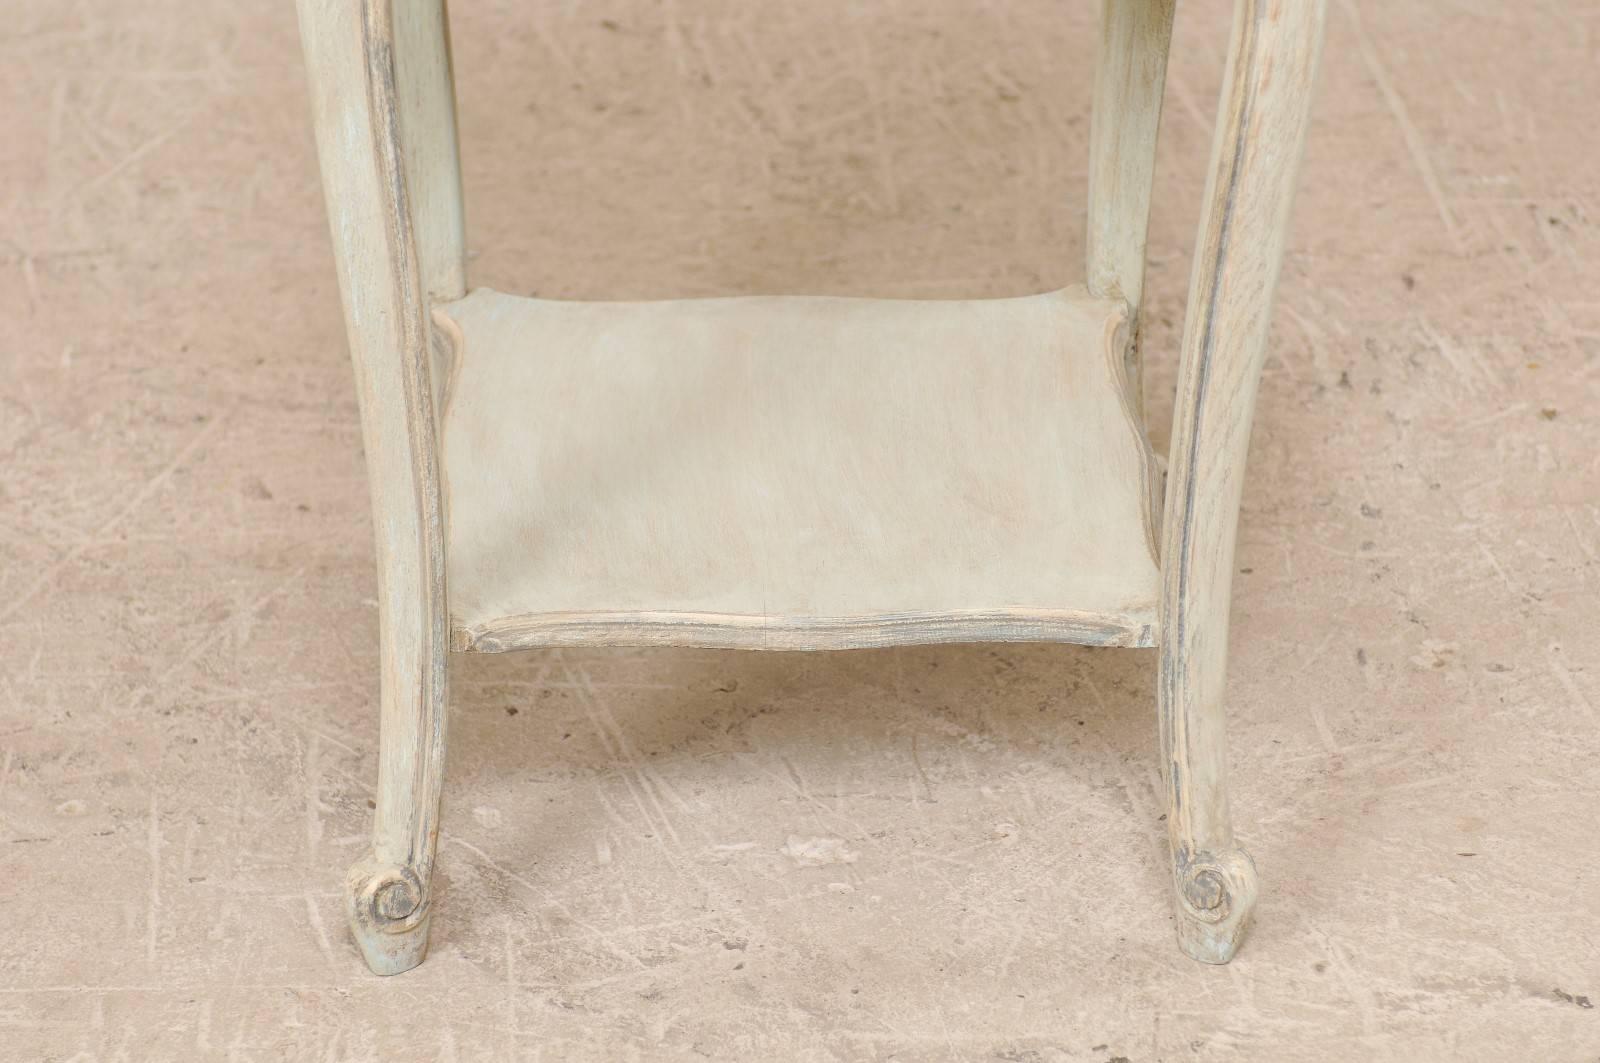 Vintage French Early 20th Century Painted Wood Side Table in Soft Pale Blue-Grey 5